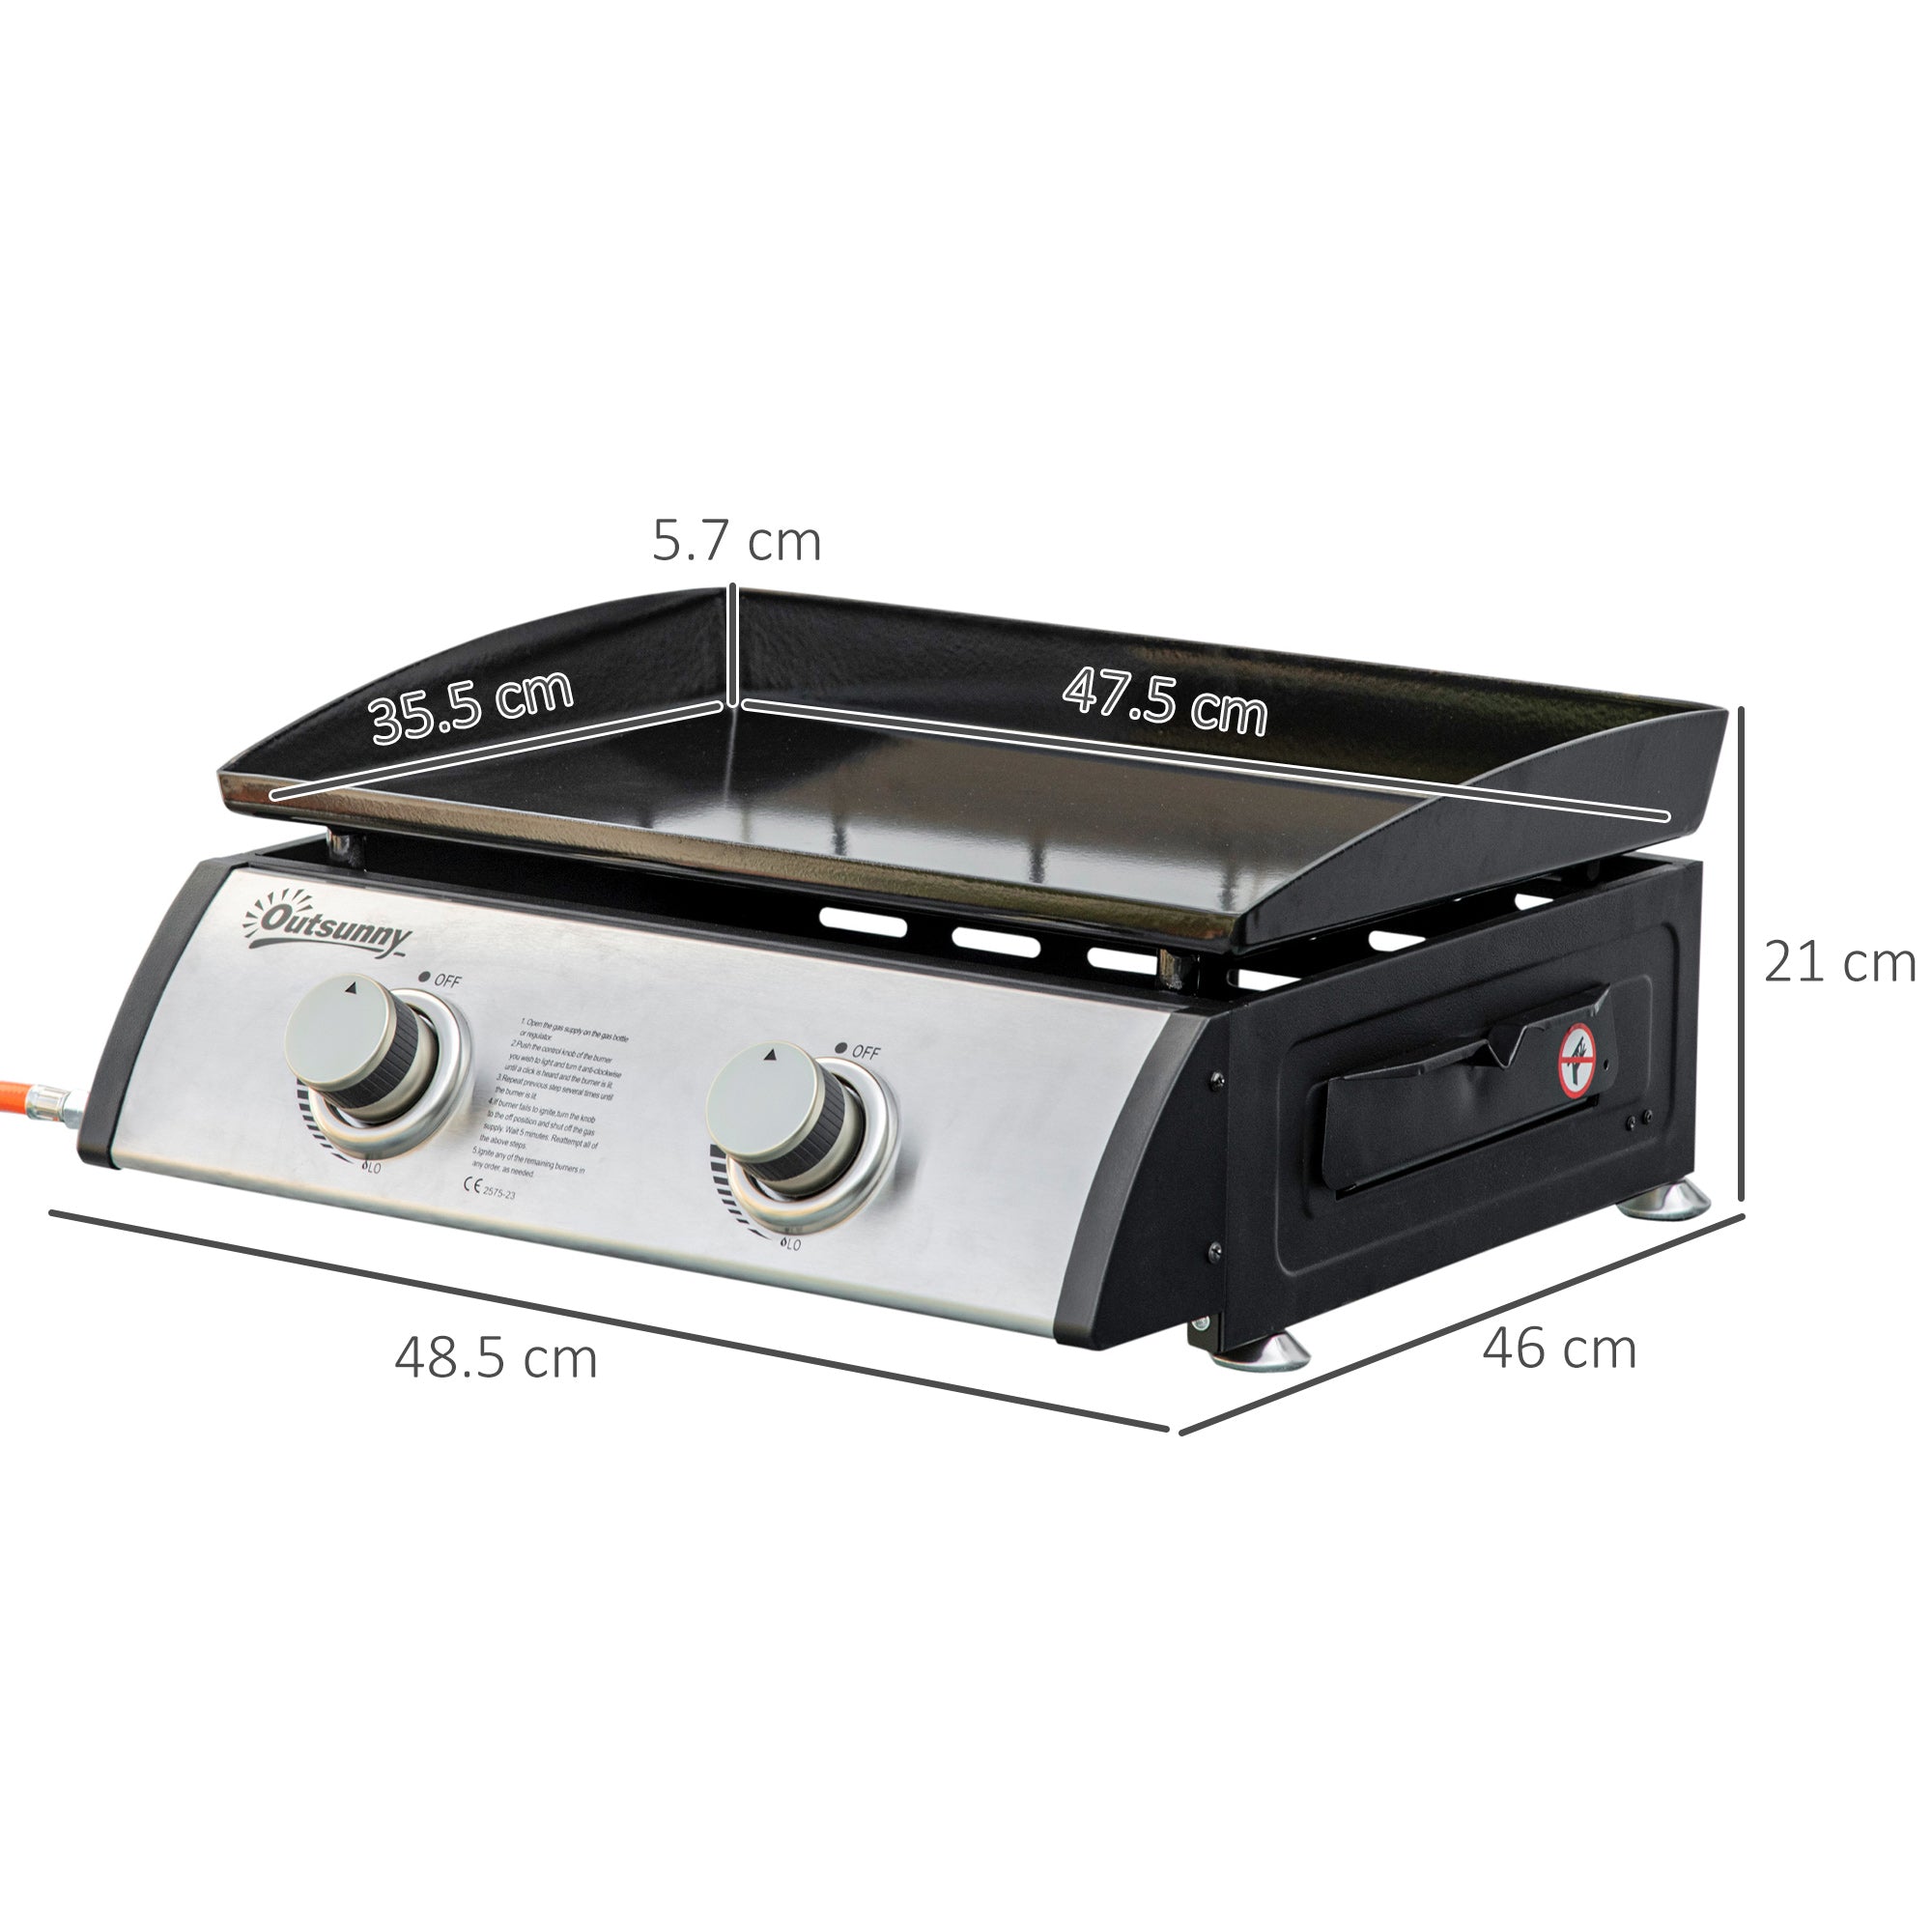 Outsunny Gas Plancha Barbecue Grill 6kW Portable Tabletop Gas BBQ w/ 2 Burners, Non-stick Hotplate, Drain Hole and Grease Collection Box - TovaHaus